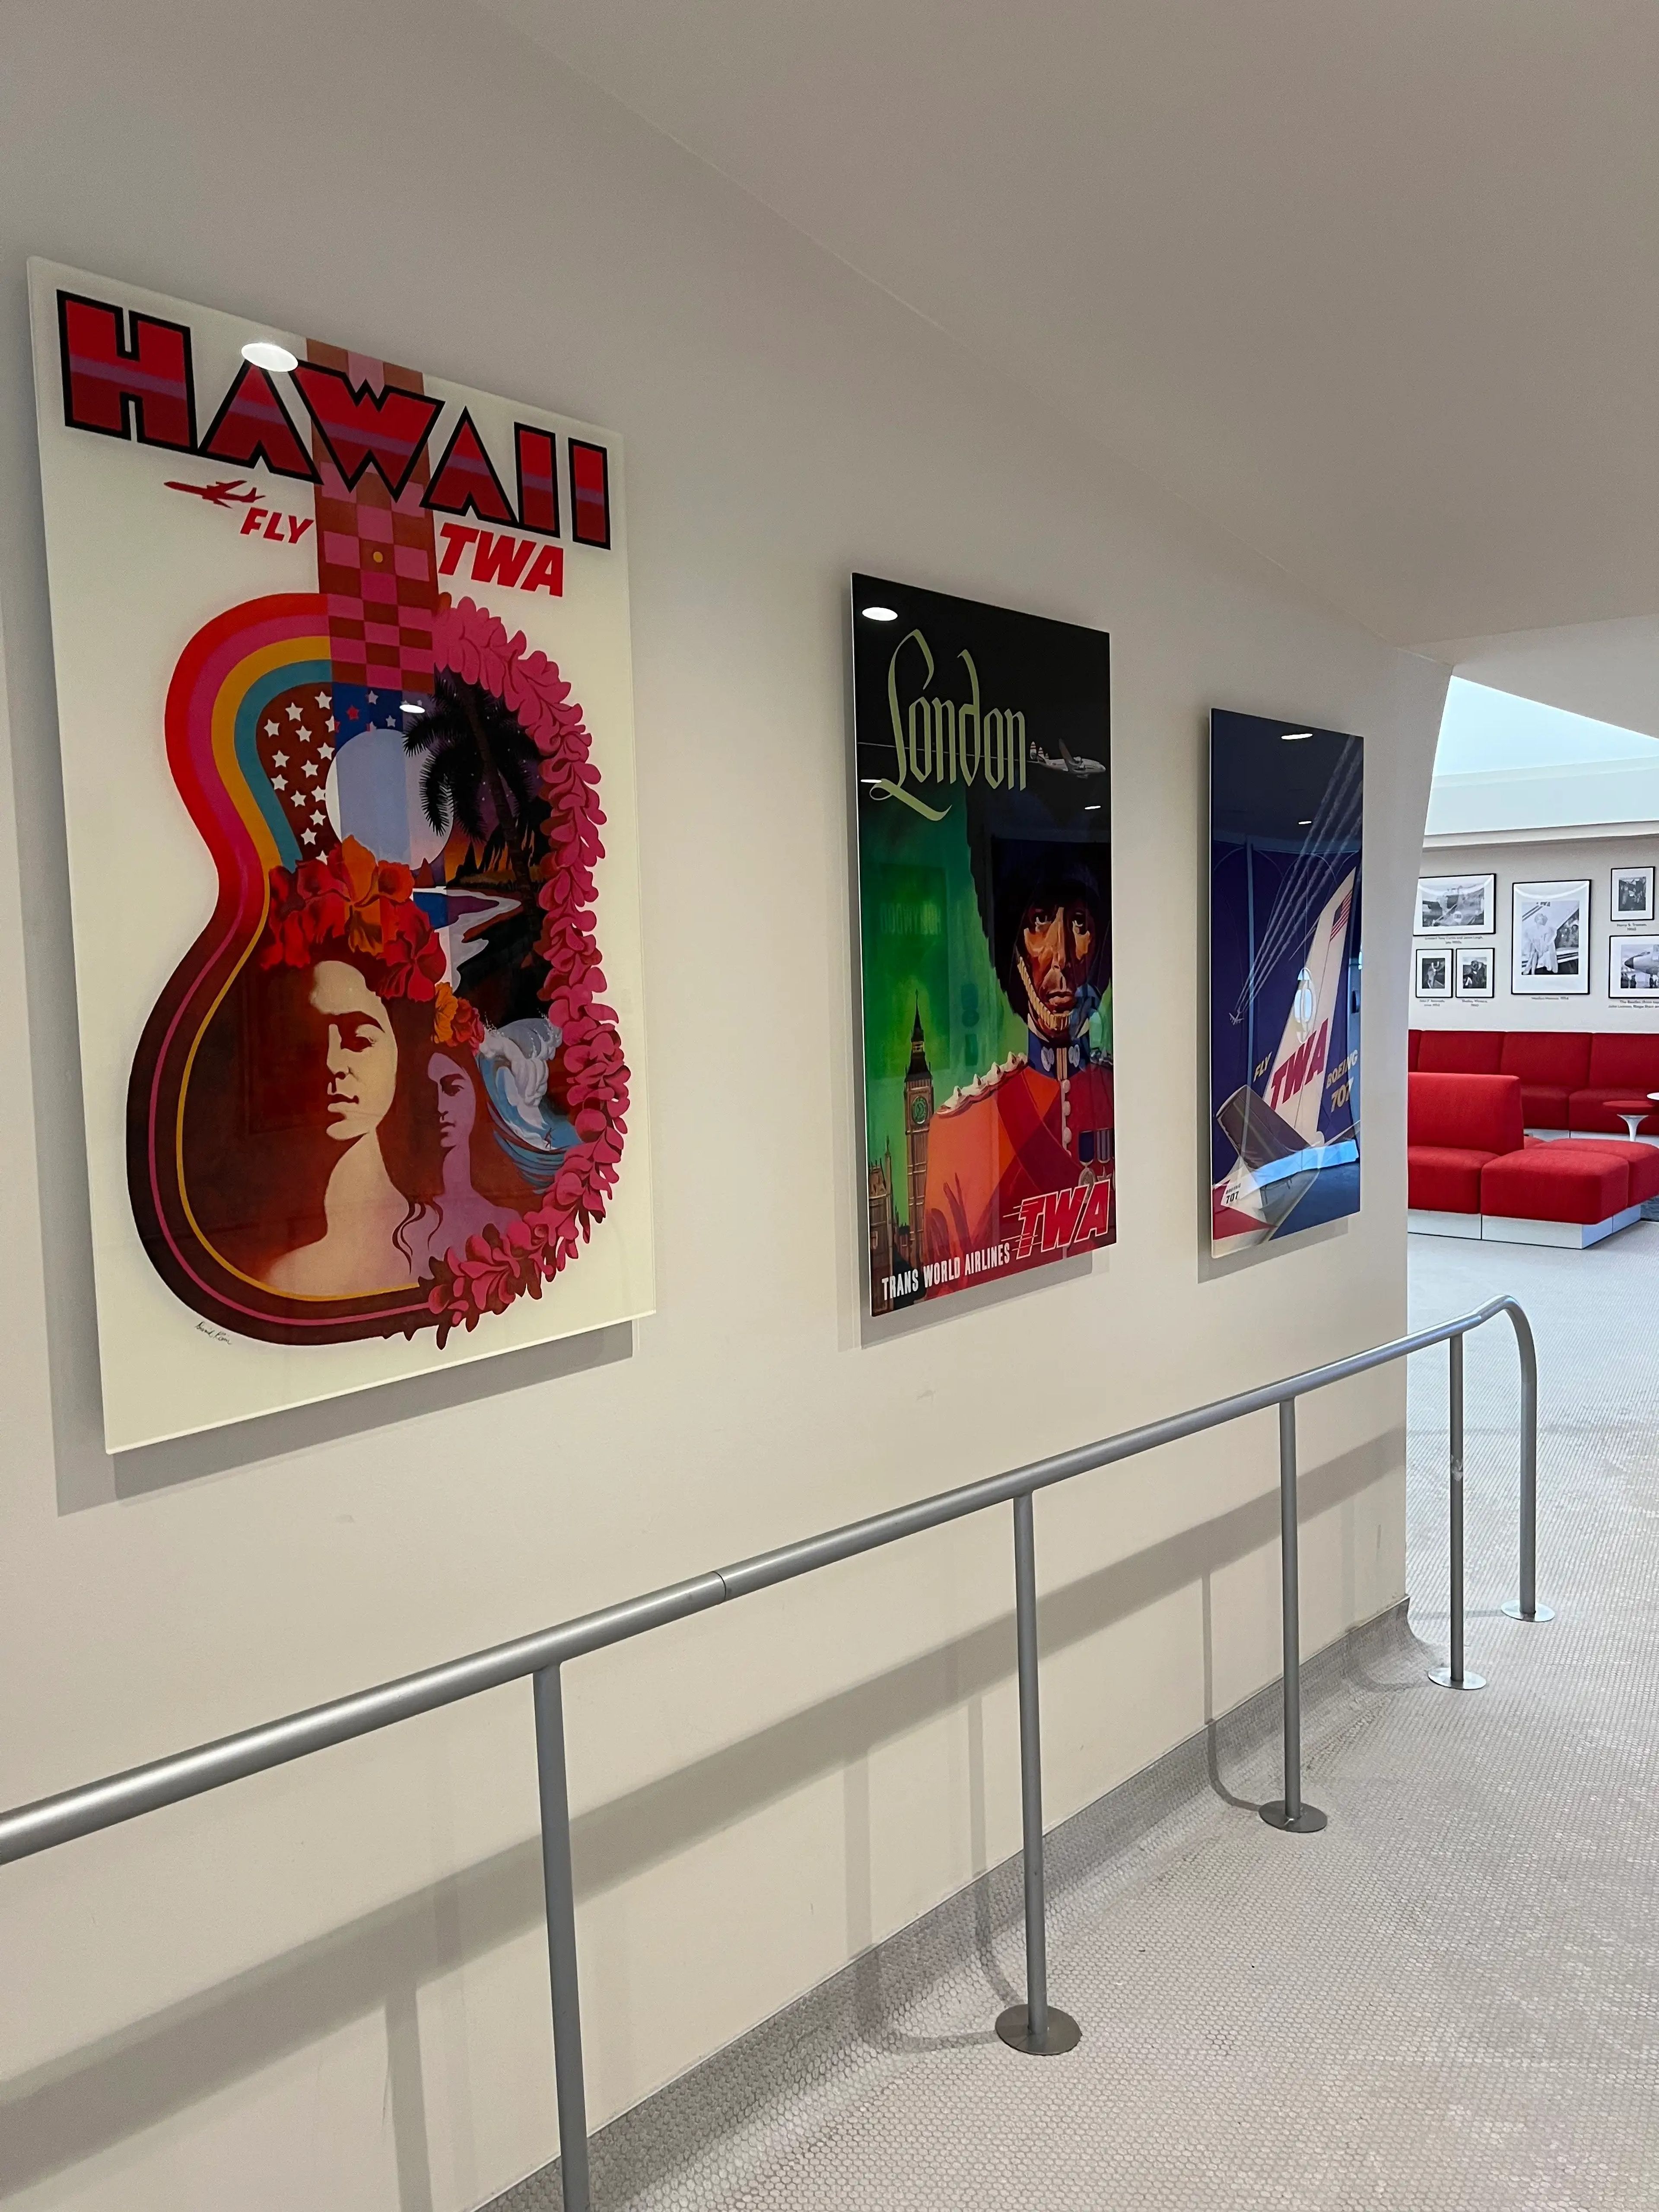 TWA Hotel posters on wall from different cities